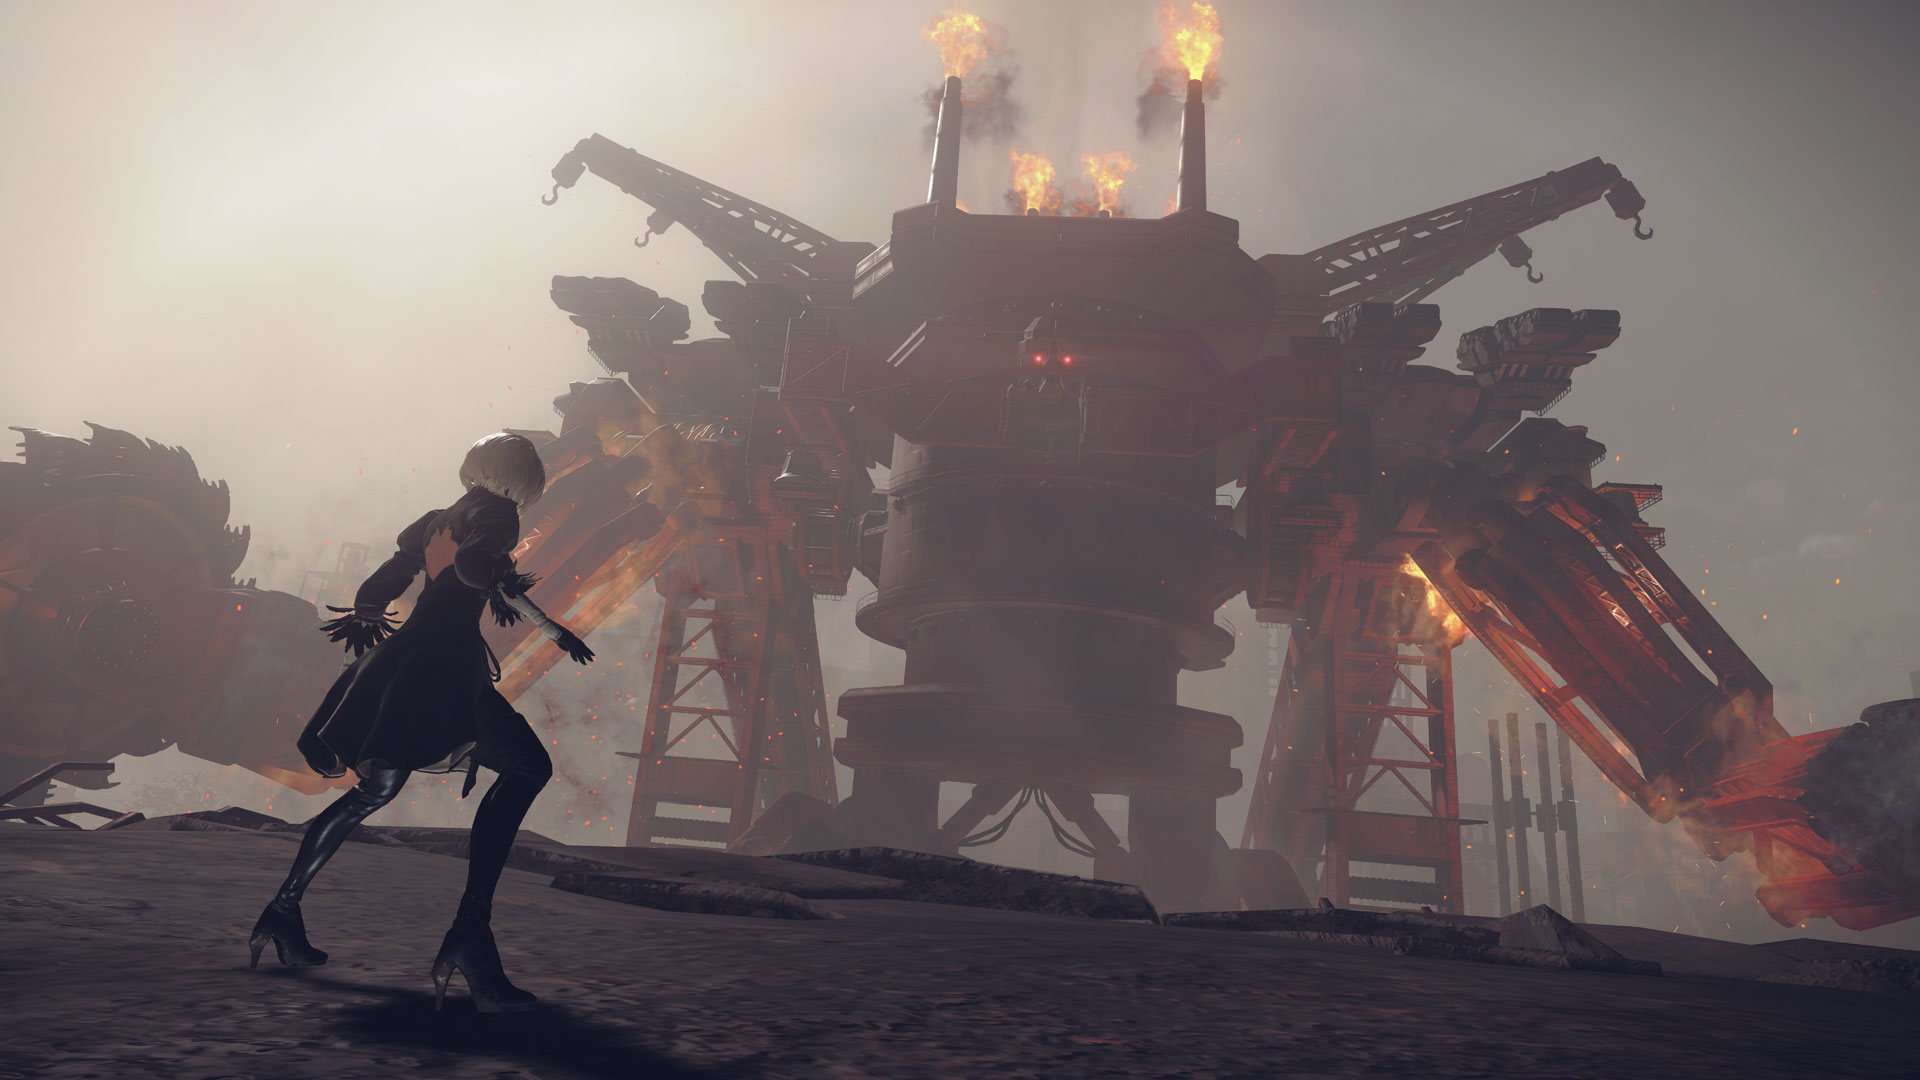 Nier: Automata Features Some Incredibly Well-Made Boss Fight Set Pieces | Source: Steam